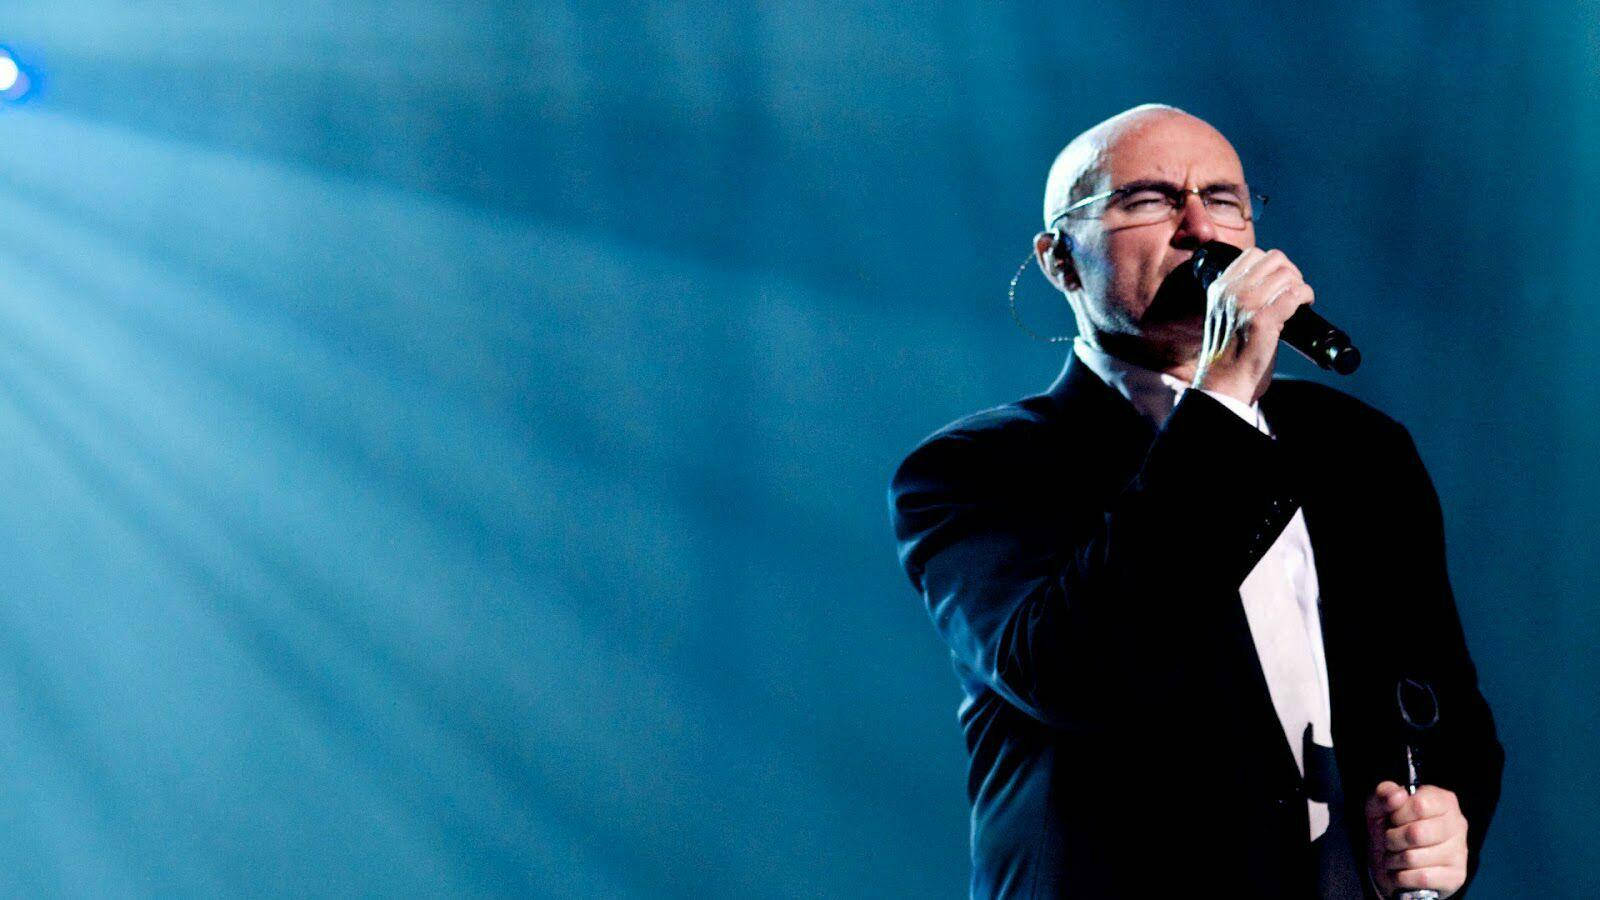 Phil Collins Performing Live Wallpaper